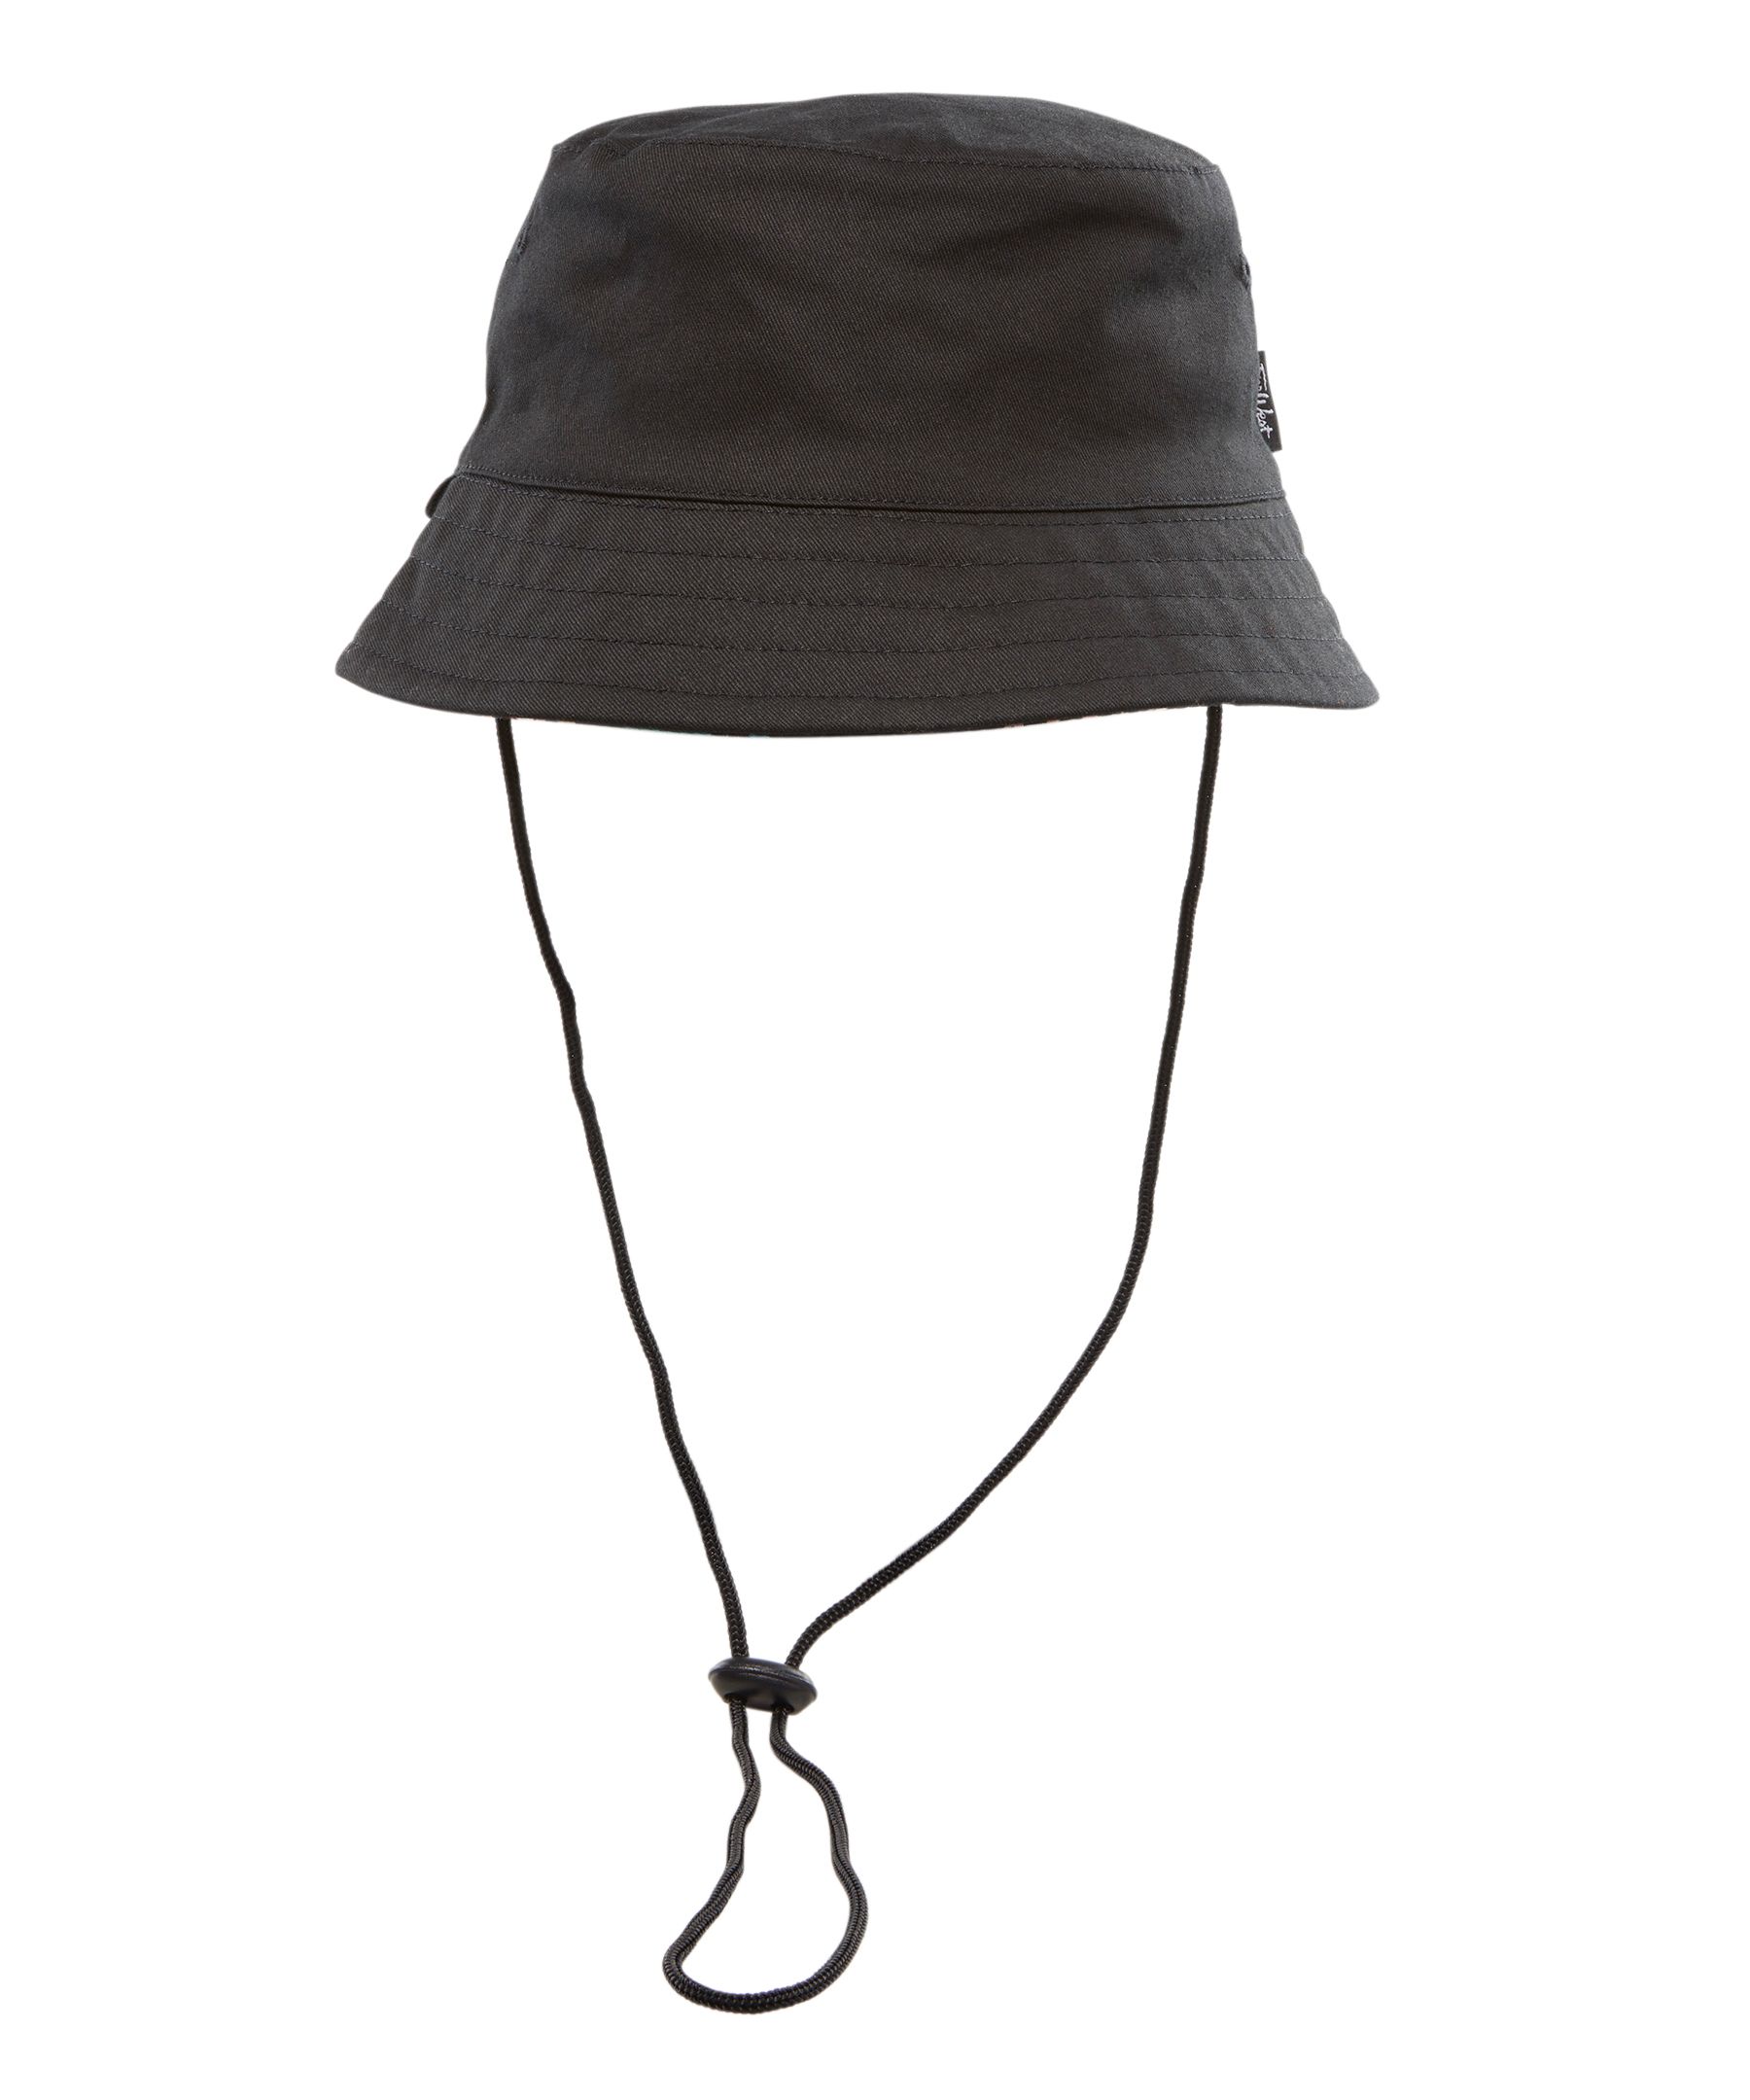 Men's Bucket Hats & Boonie Hats With Drawstring